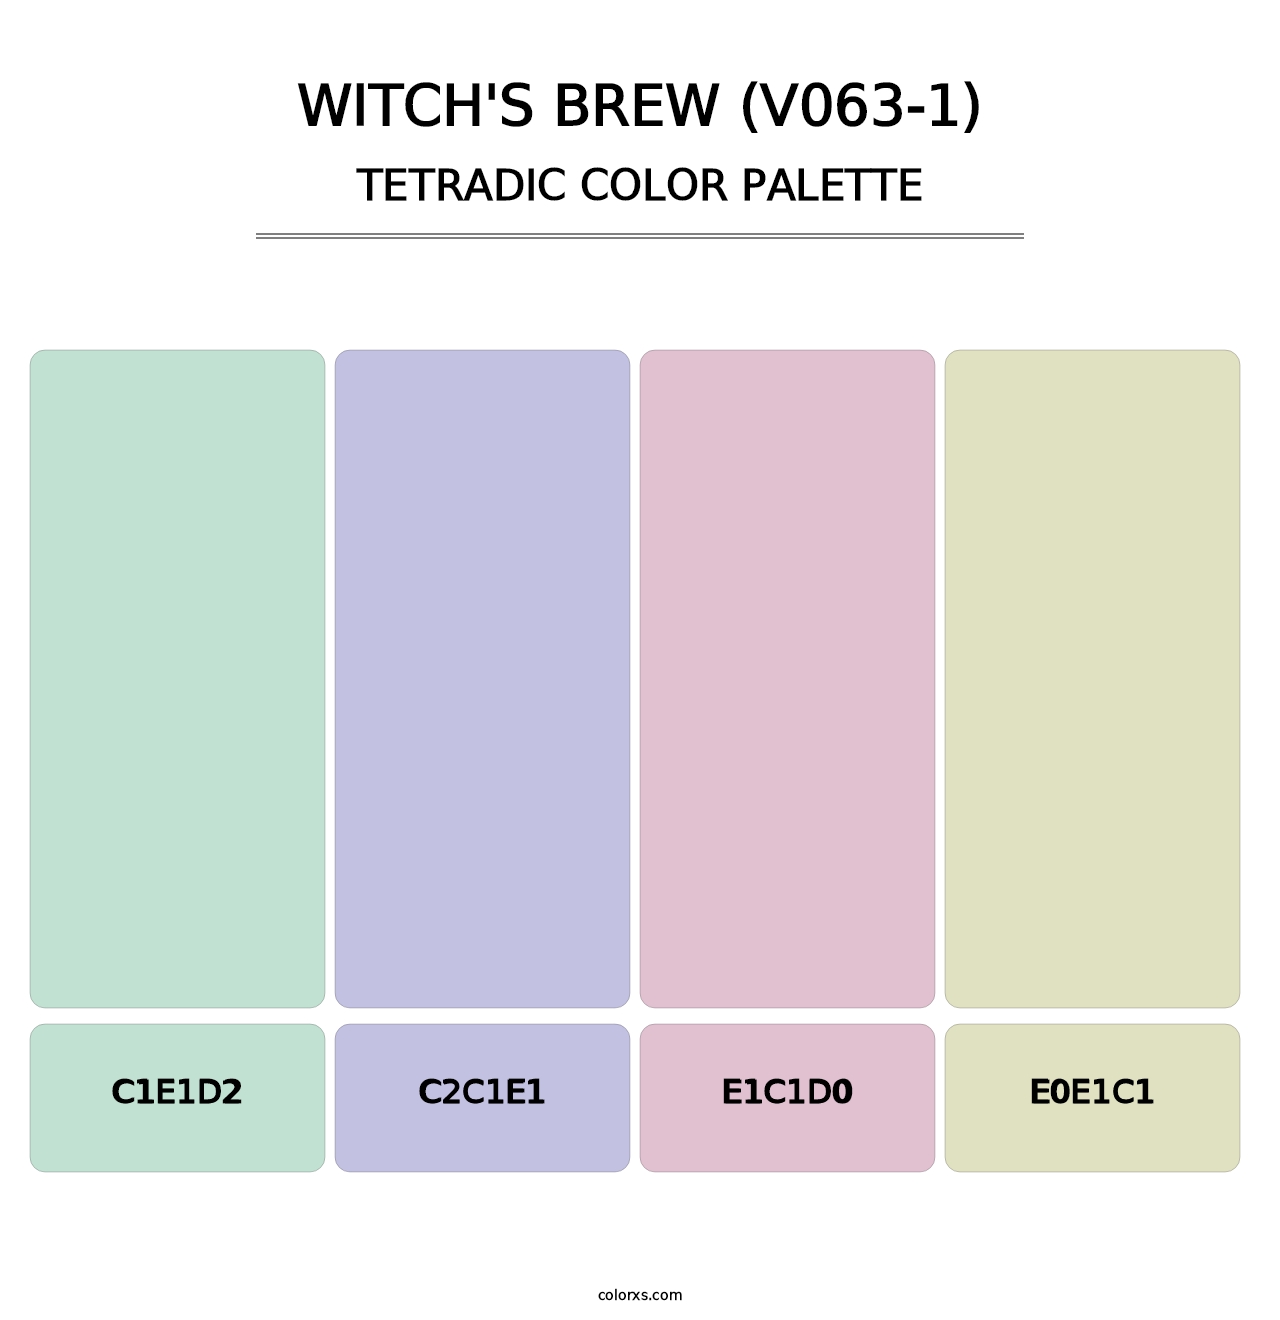 Witch's Brew (V063-1) - Tetradic Color Palette